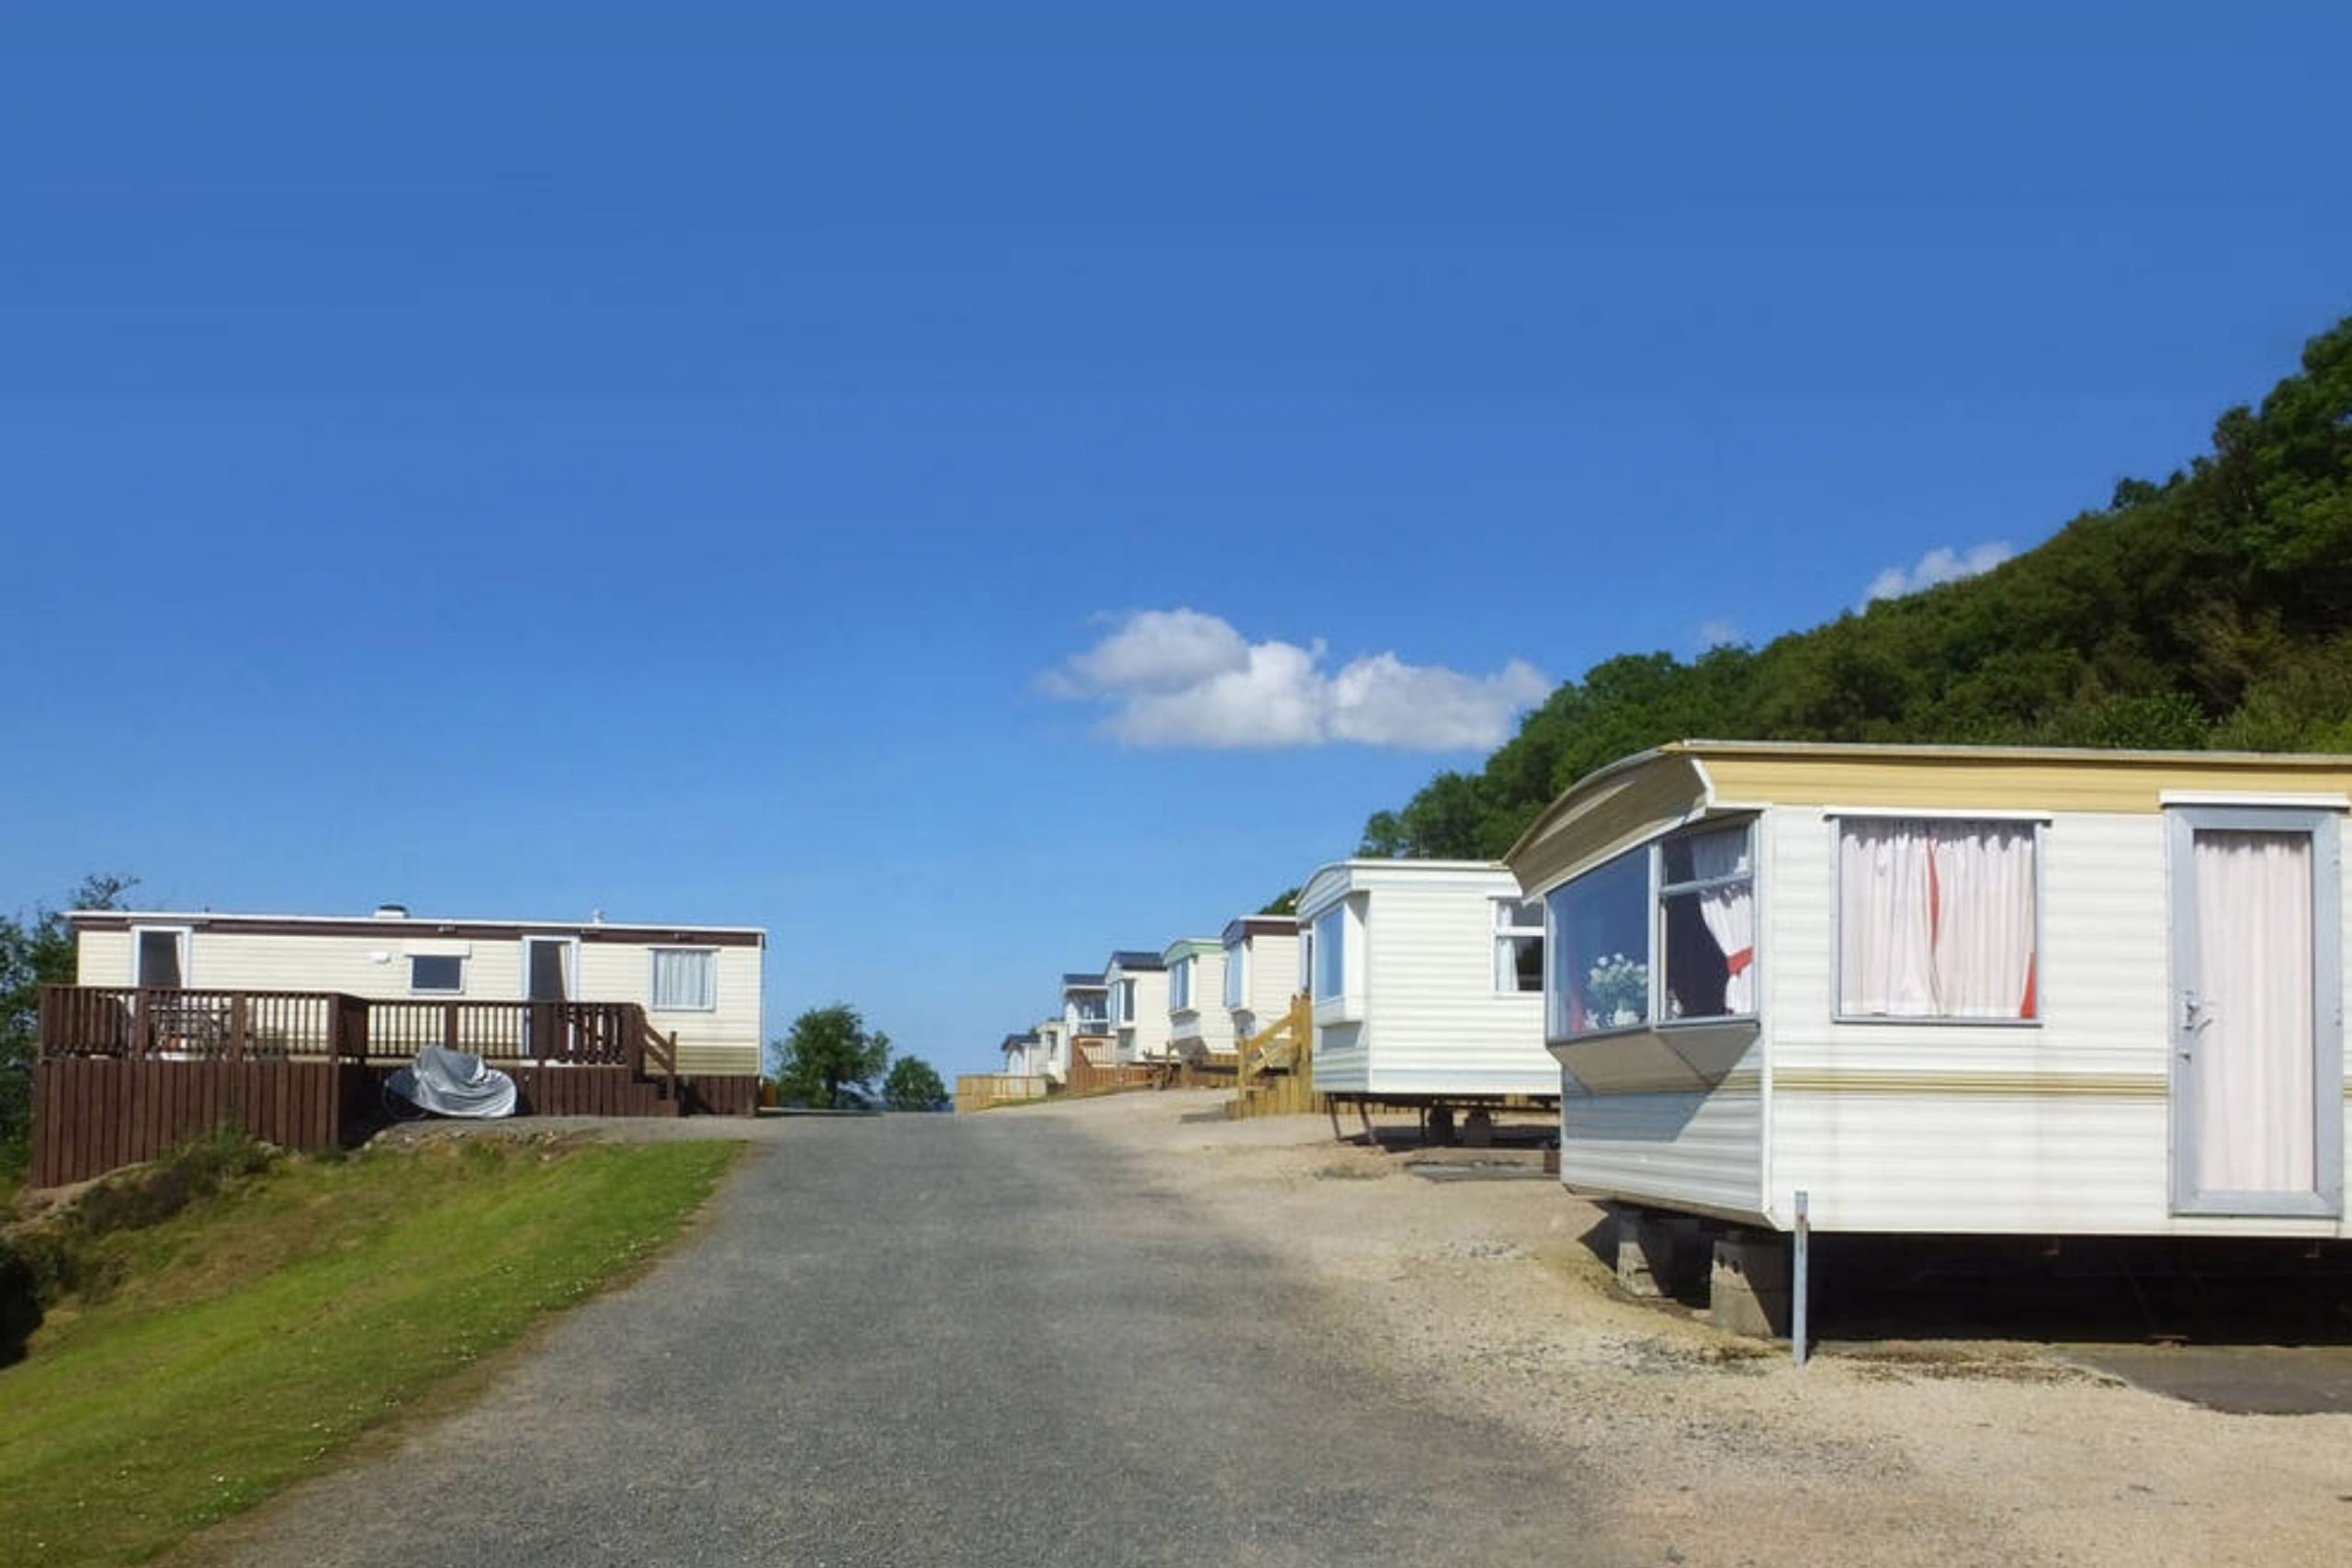 How Much It Will Cost to Put Your Mobile Home On a Permanent Foundation